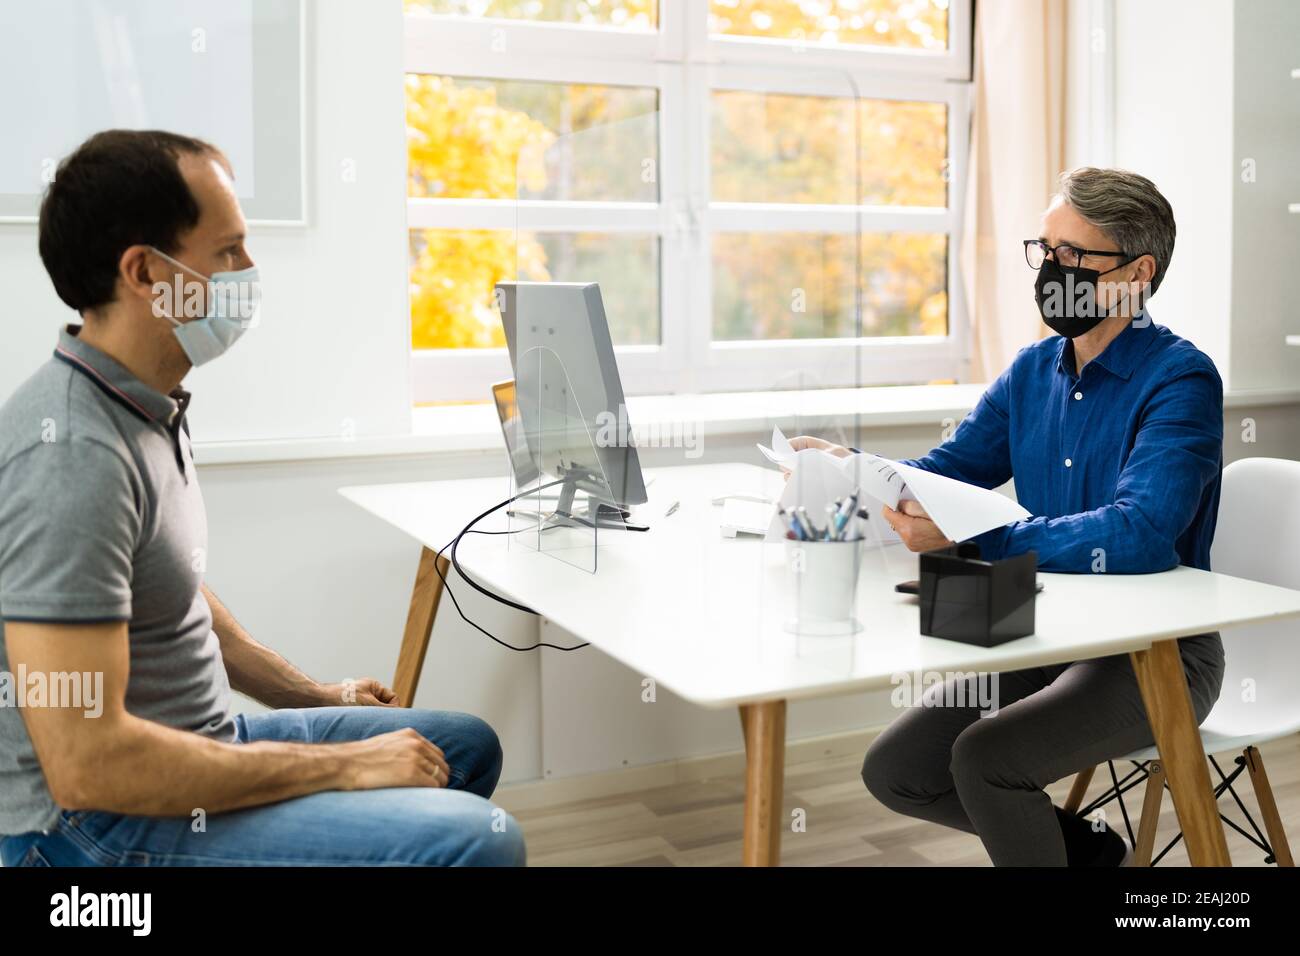 Insurance Consultant Or Lawyer In Bank With Sneeze Guard Stock Photo